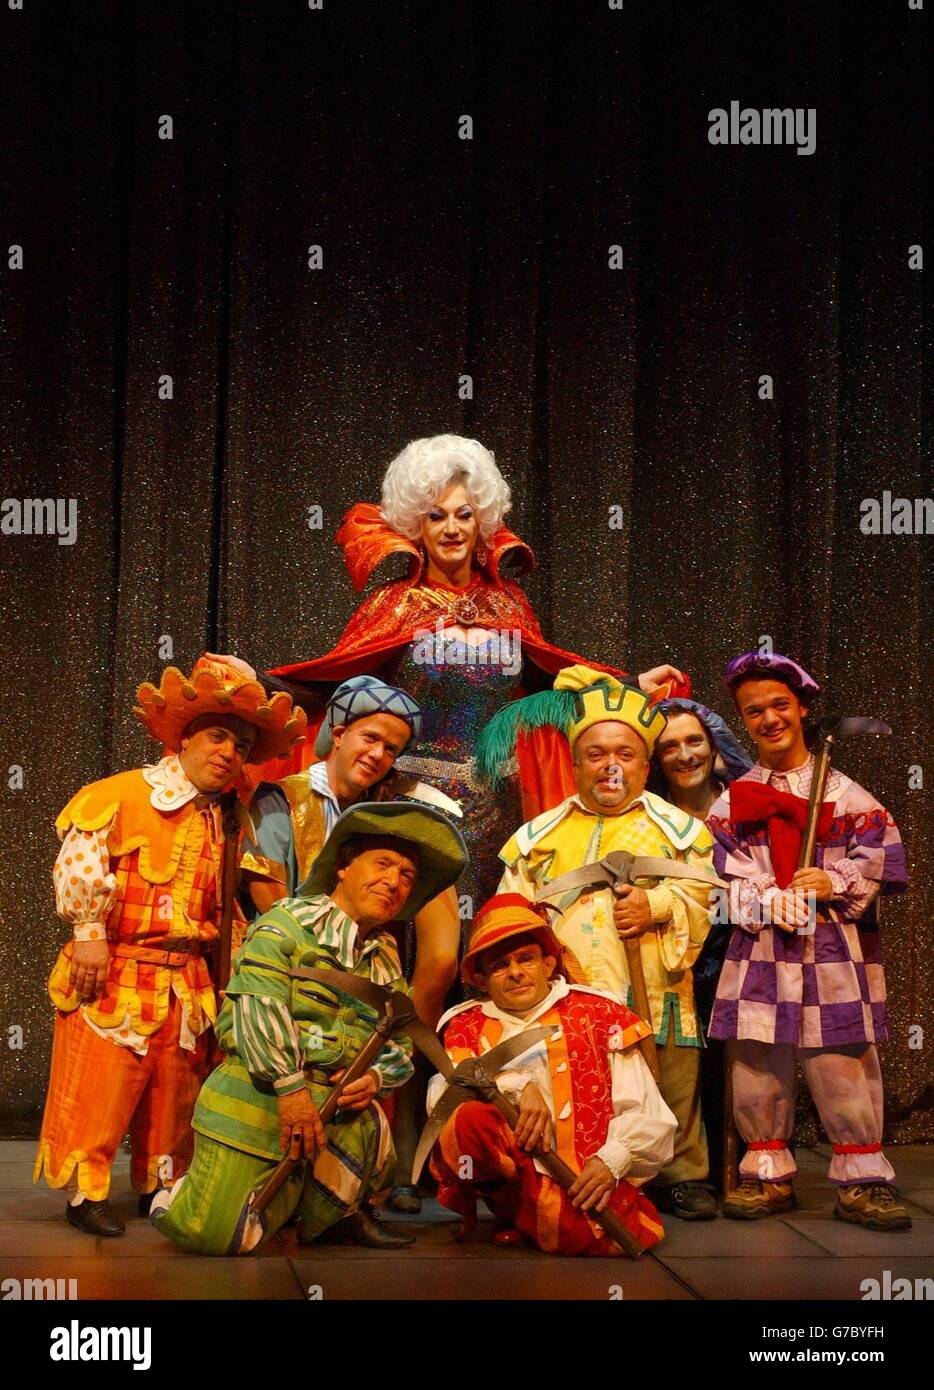 Lily Savage as the Wicked Queen with the seven dwarfs pose for photographers on stage during a photocall for Snow White and the Seven Dwarfs at the Victoria Palace Theatre in London. The family pantomime runs at the theatre for only 50 performances from Friday 17 December to Sunday 23 January 2005. Stock Photo